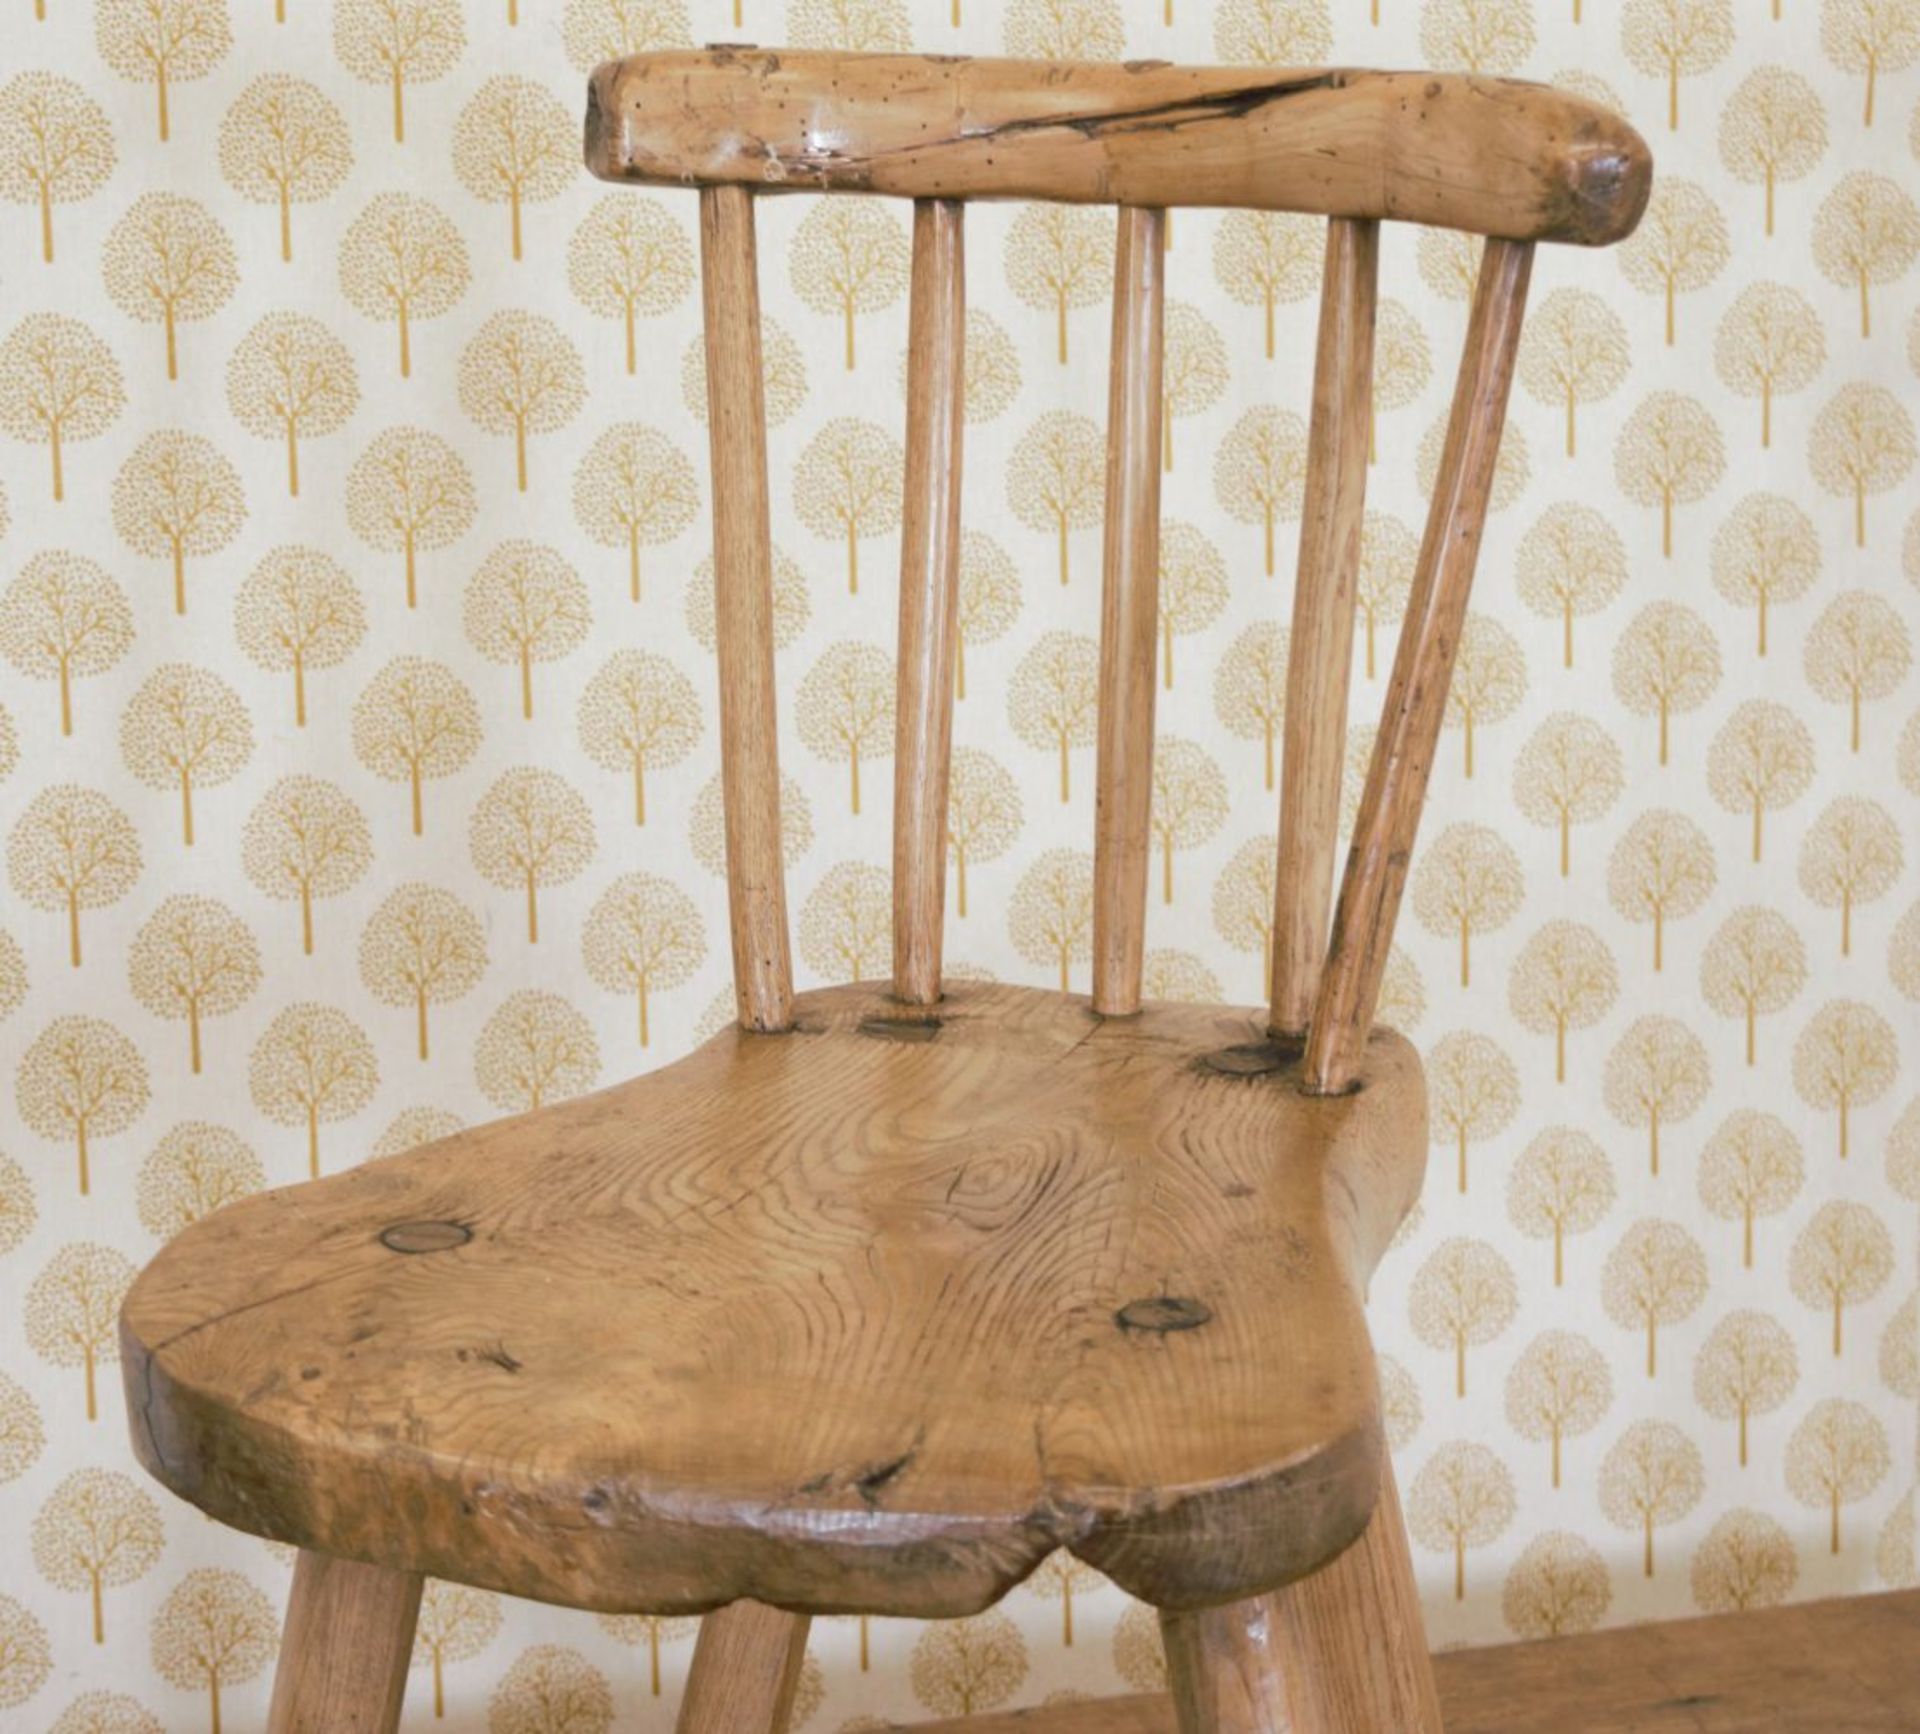 EARLY 19TH-CENTURY COCK FIGHTING HEDGE CHAIR - Image 4 of 4